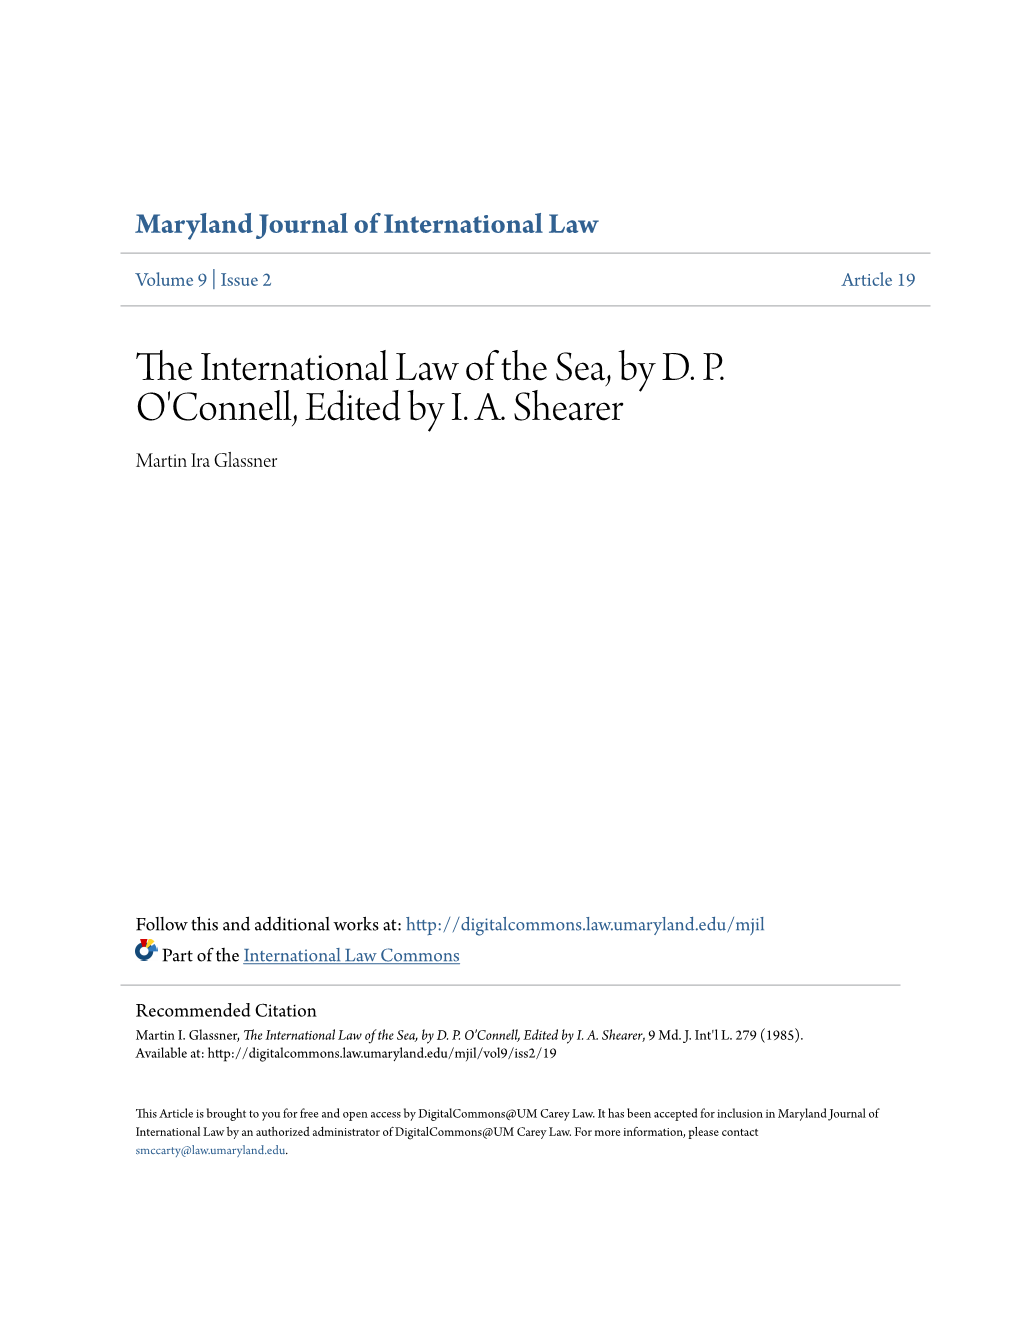 The International Law of the Sea, by D. P. O'connell, Edited by I. A. Shearer, 9 Md